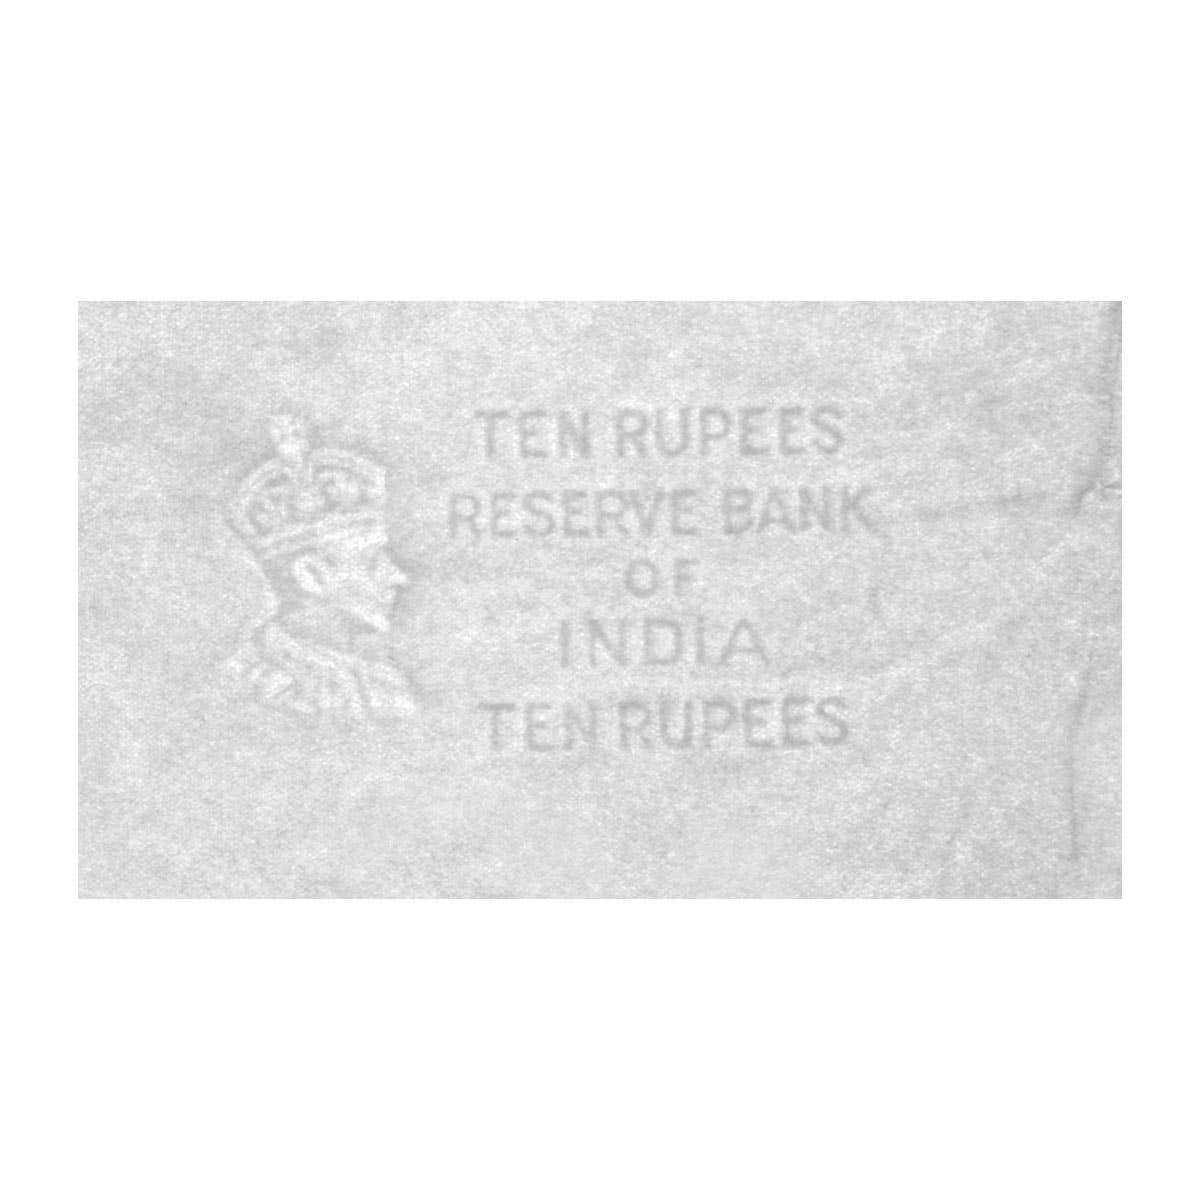 India 1940 10 Rupees Ship Wreck Banknote Uncirculated